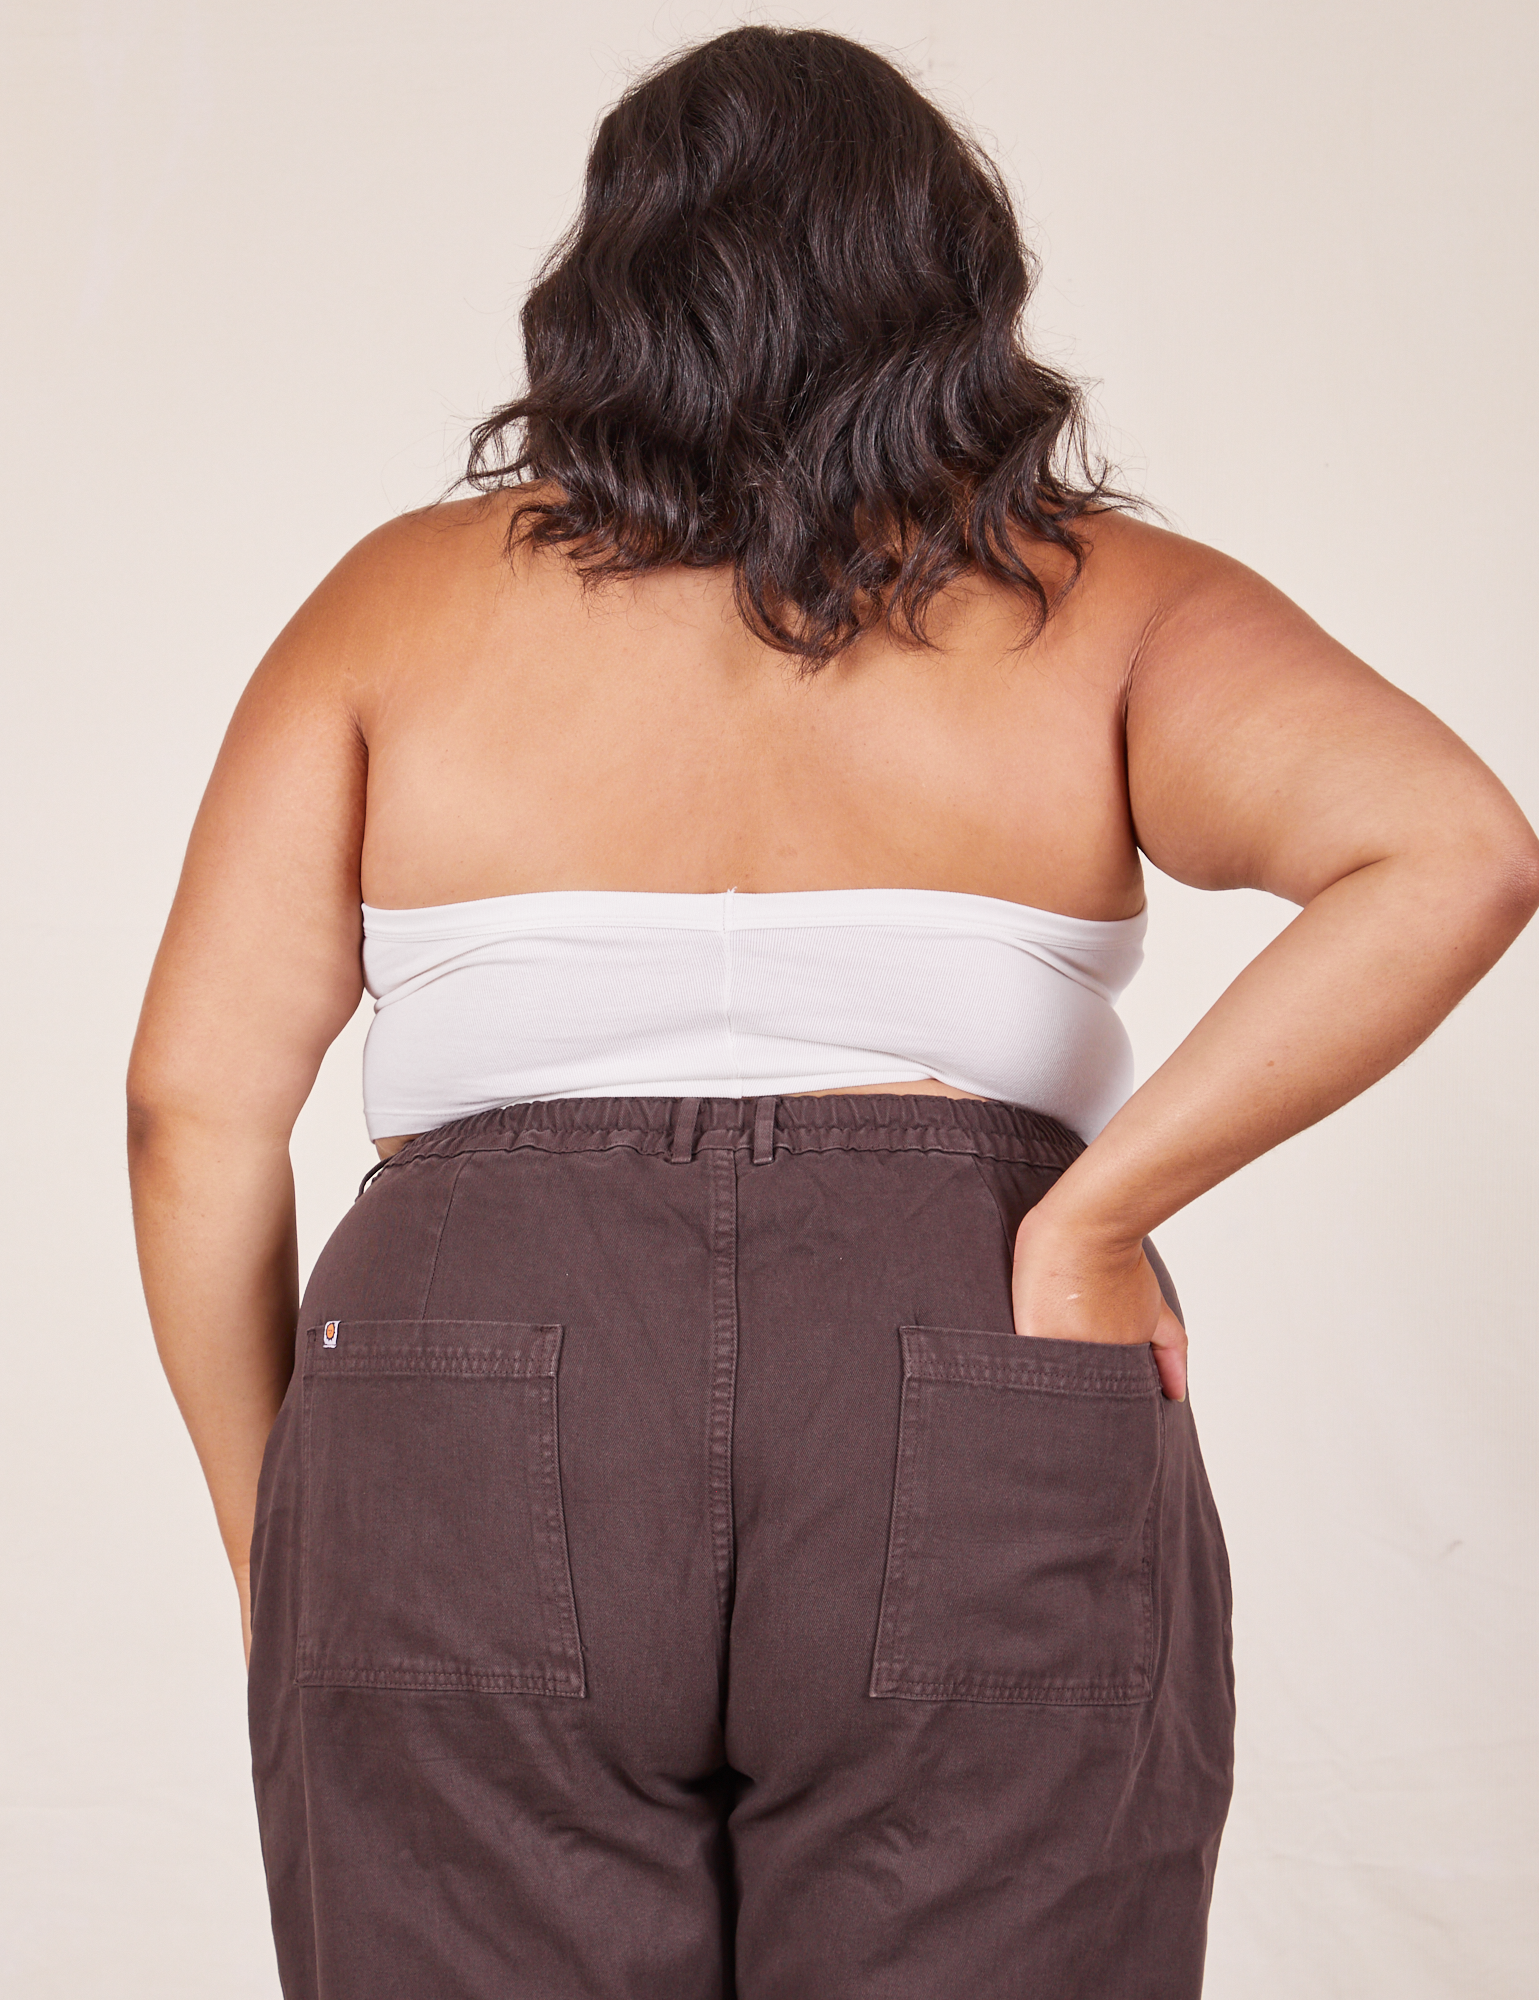 Back view of Halter Top in Vintage Tee Off-White and espresso brown Western Pants worn by Alicia. She has her left hand in the back of the pant pocket.